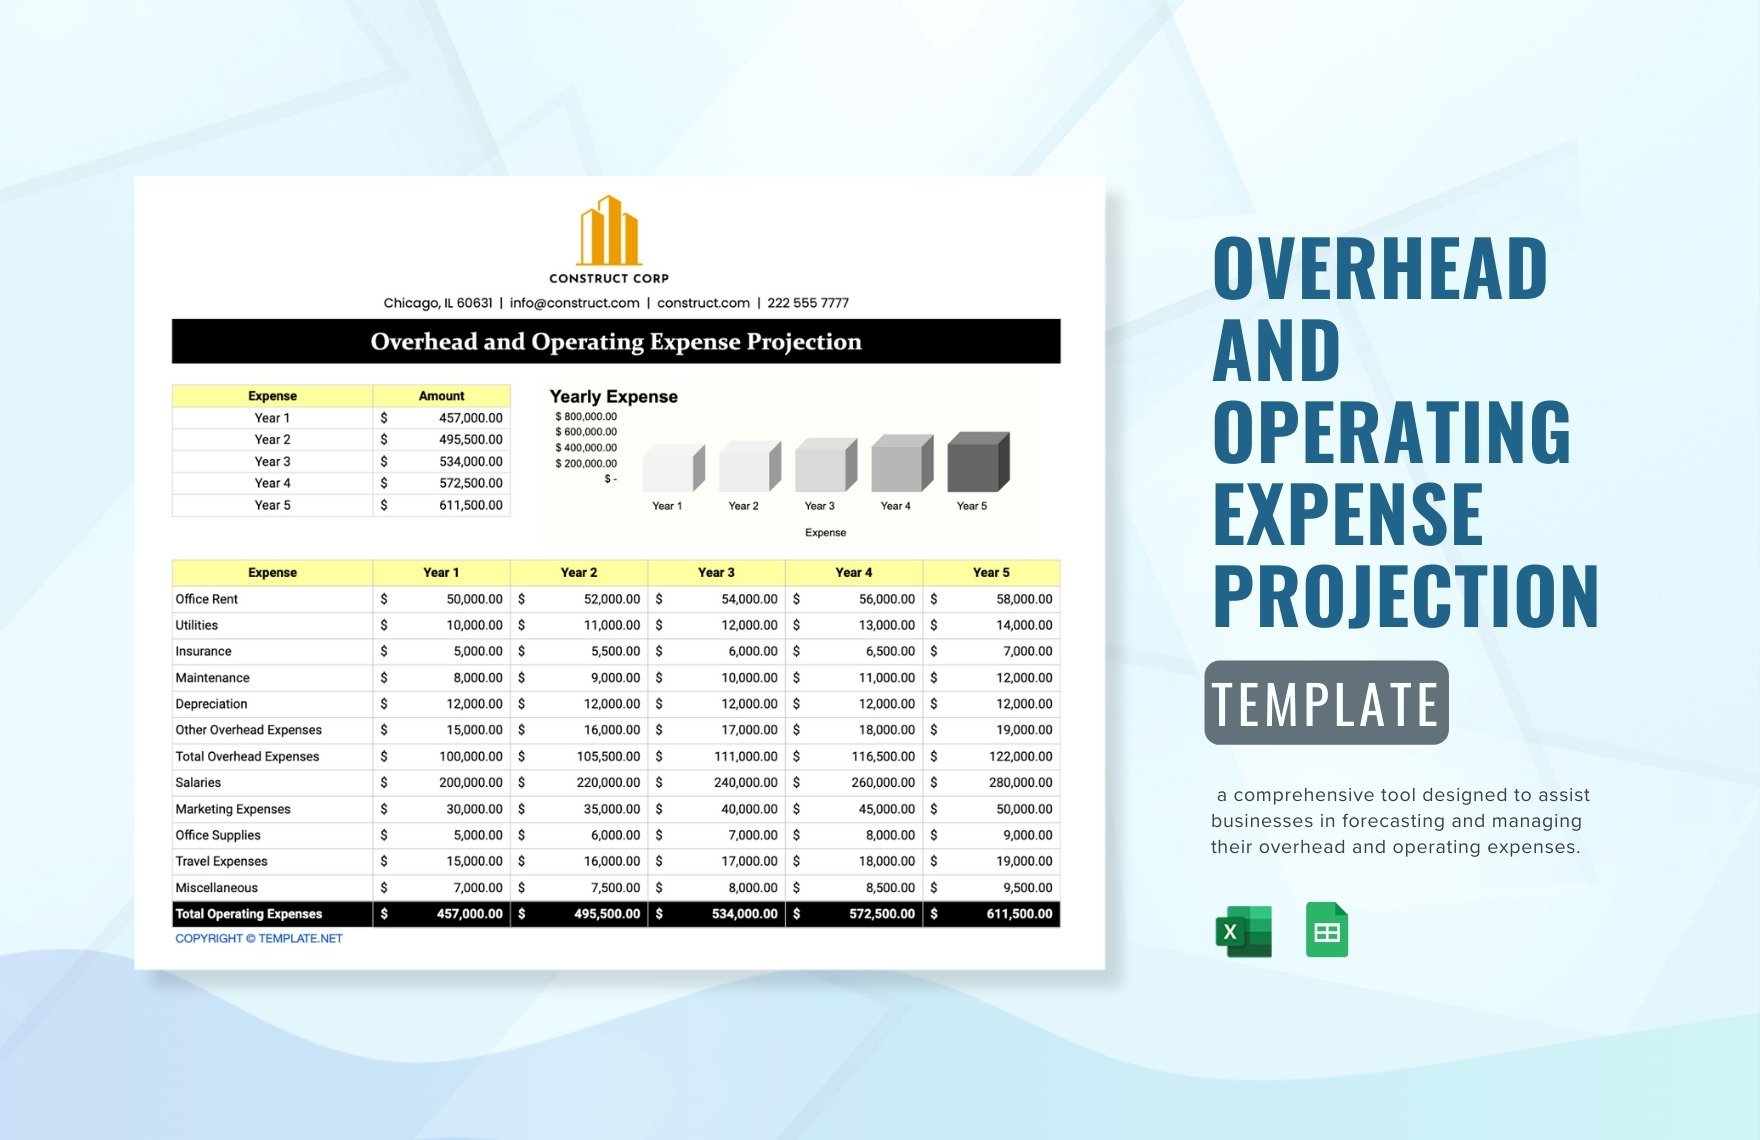 Overhead and Operating Expense Projection Template